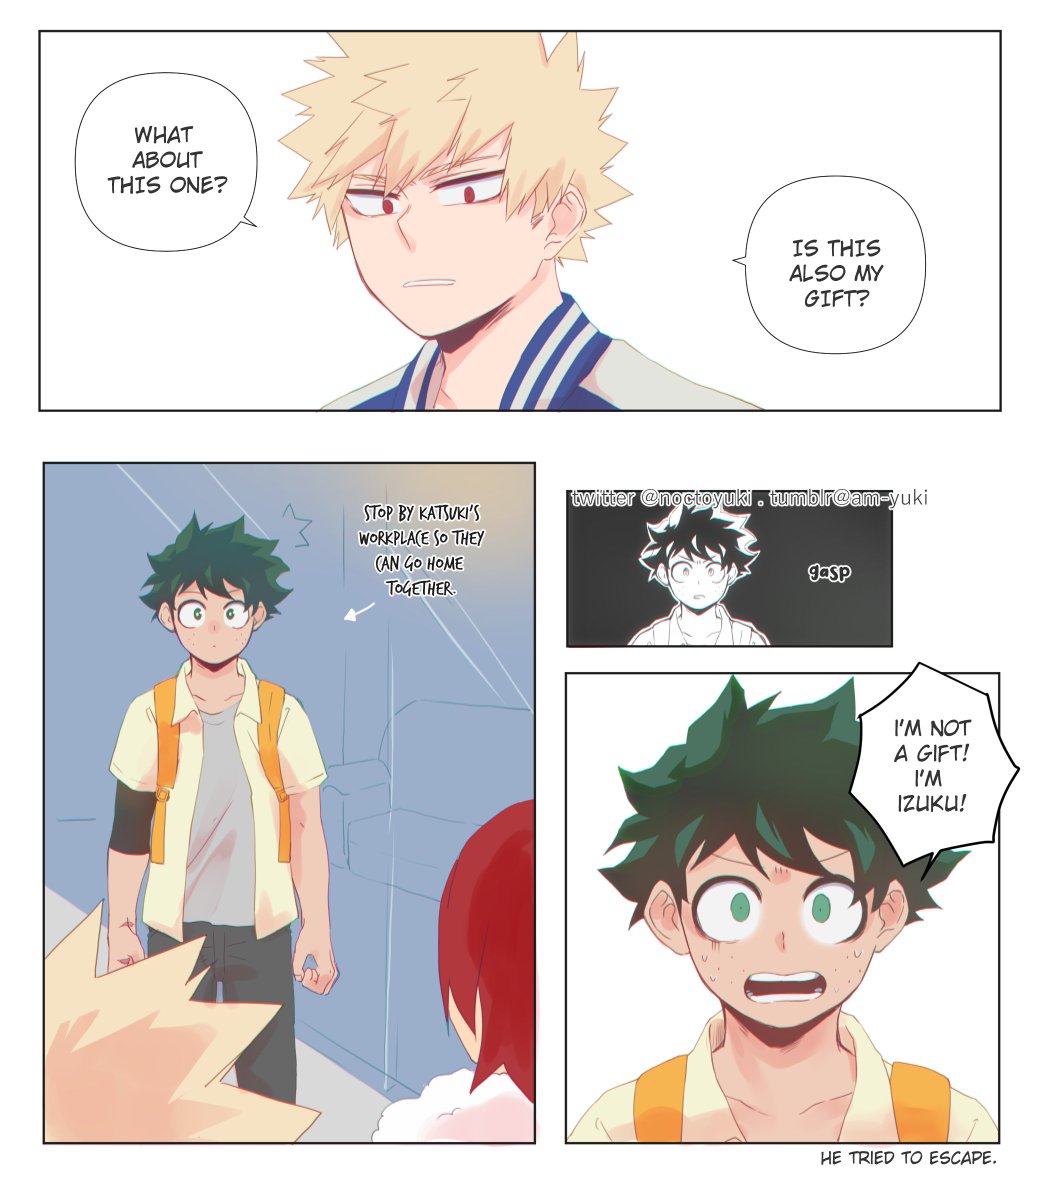 Day...6,,,,, to Kacchan's birthday. ?
The best gift, perhaps?

Also a prompt by @/LadyBookman666 